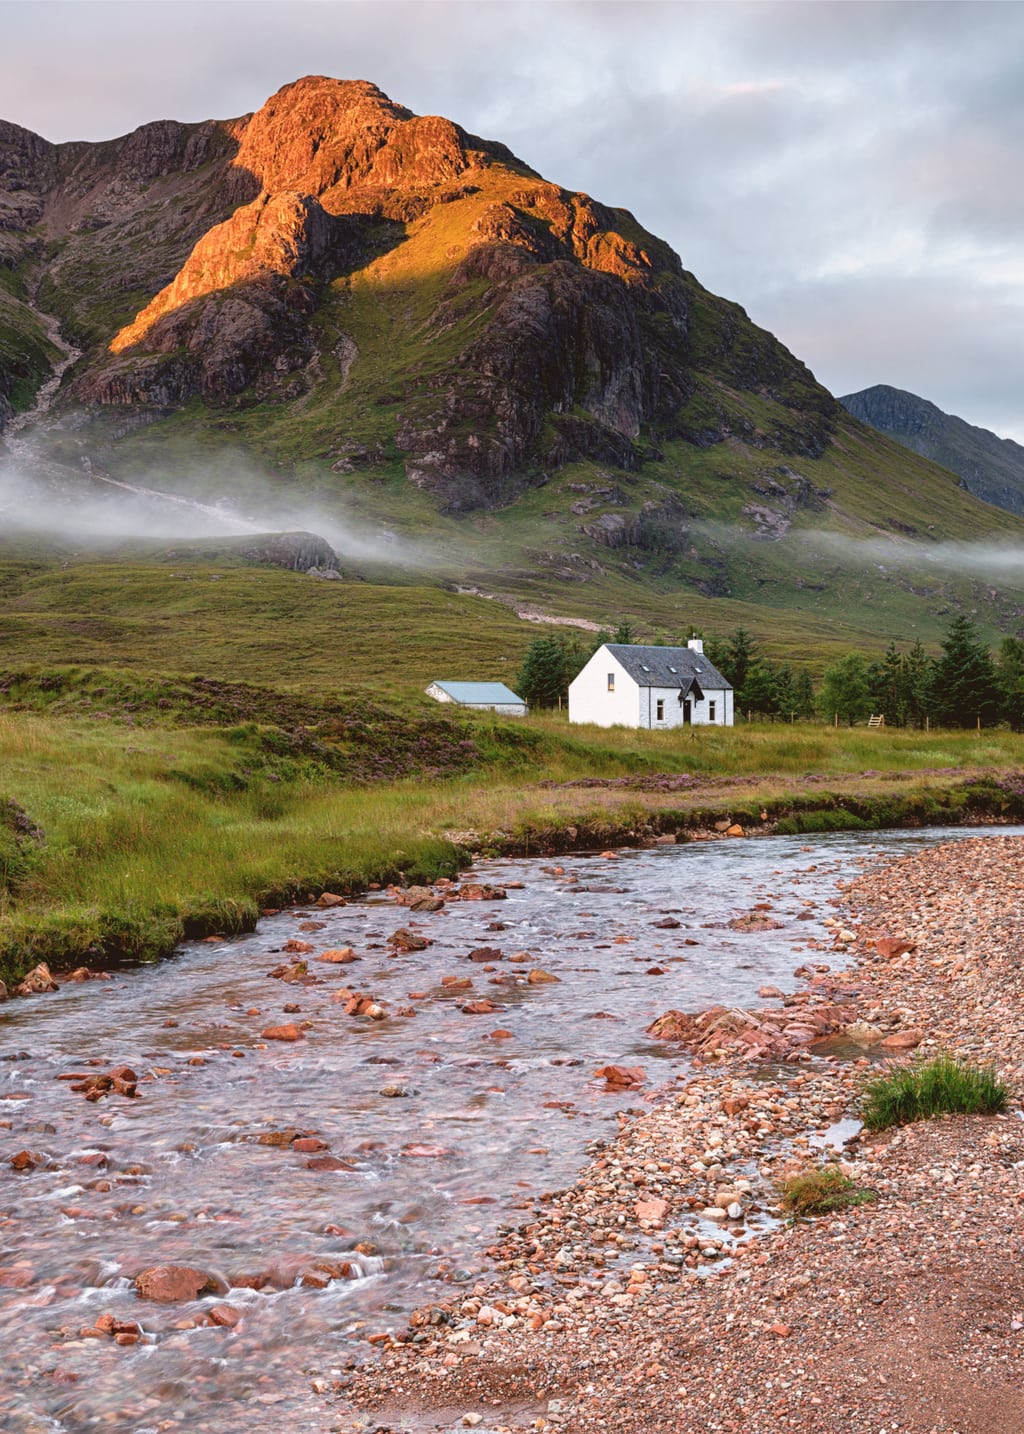 A Remote Mountain Bothy at the Foot of Glencoe in Scotland